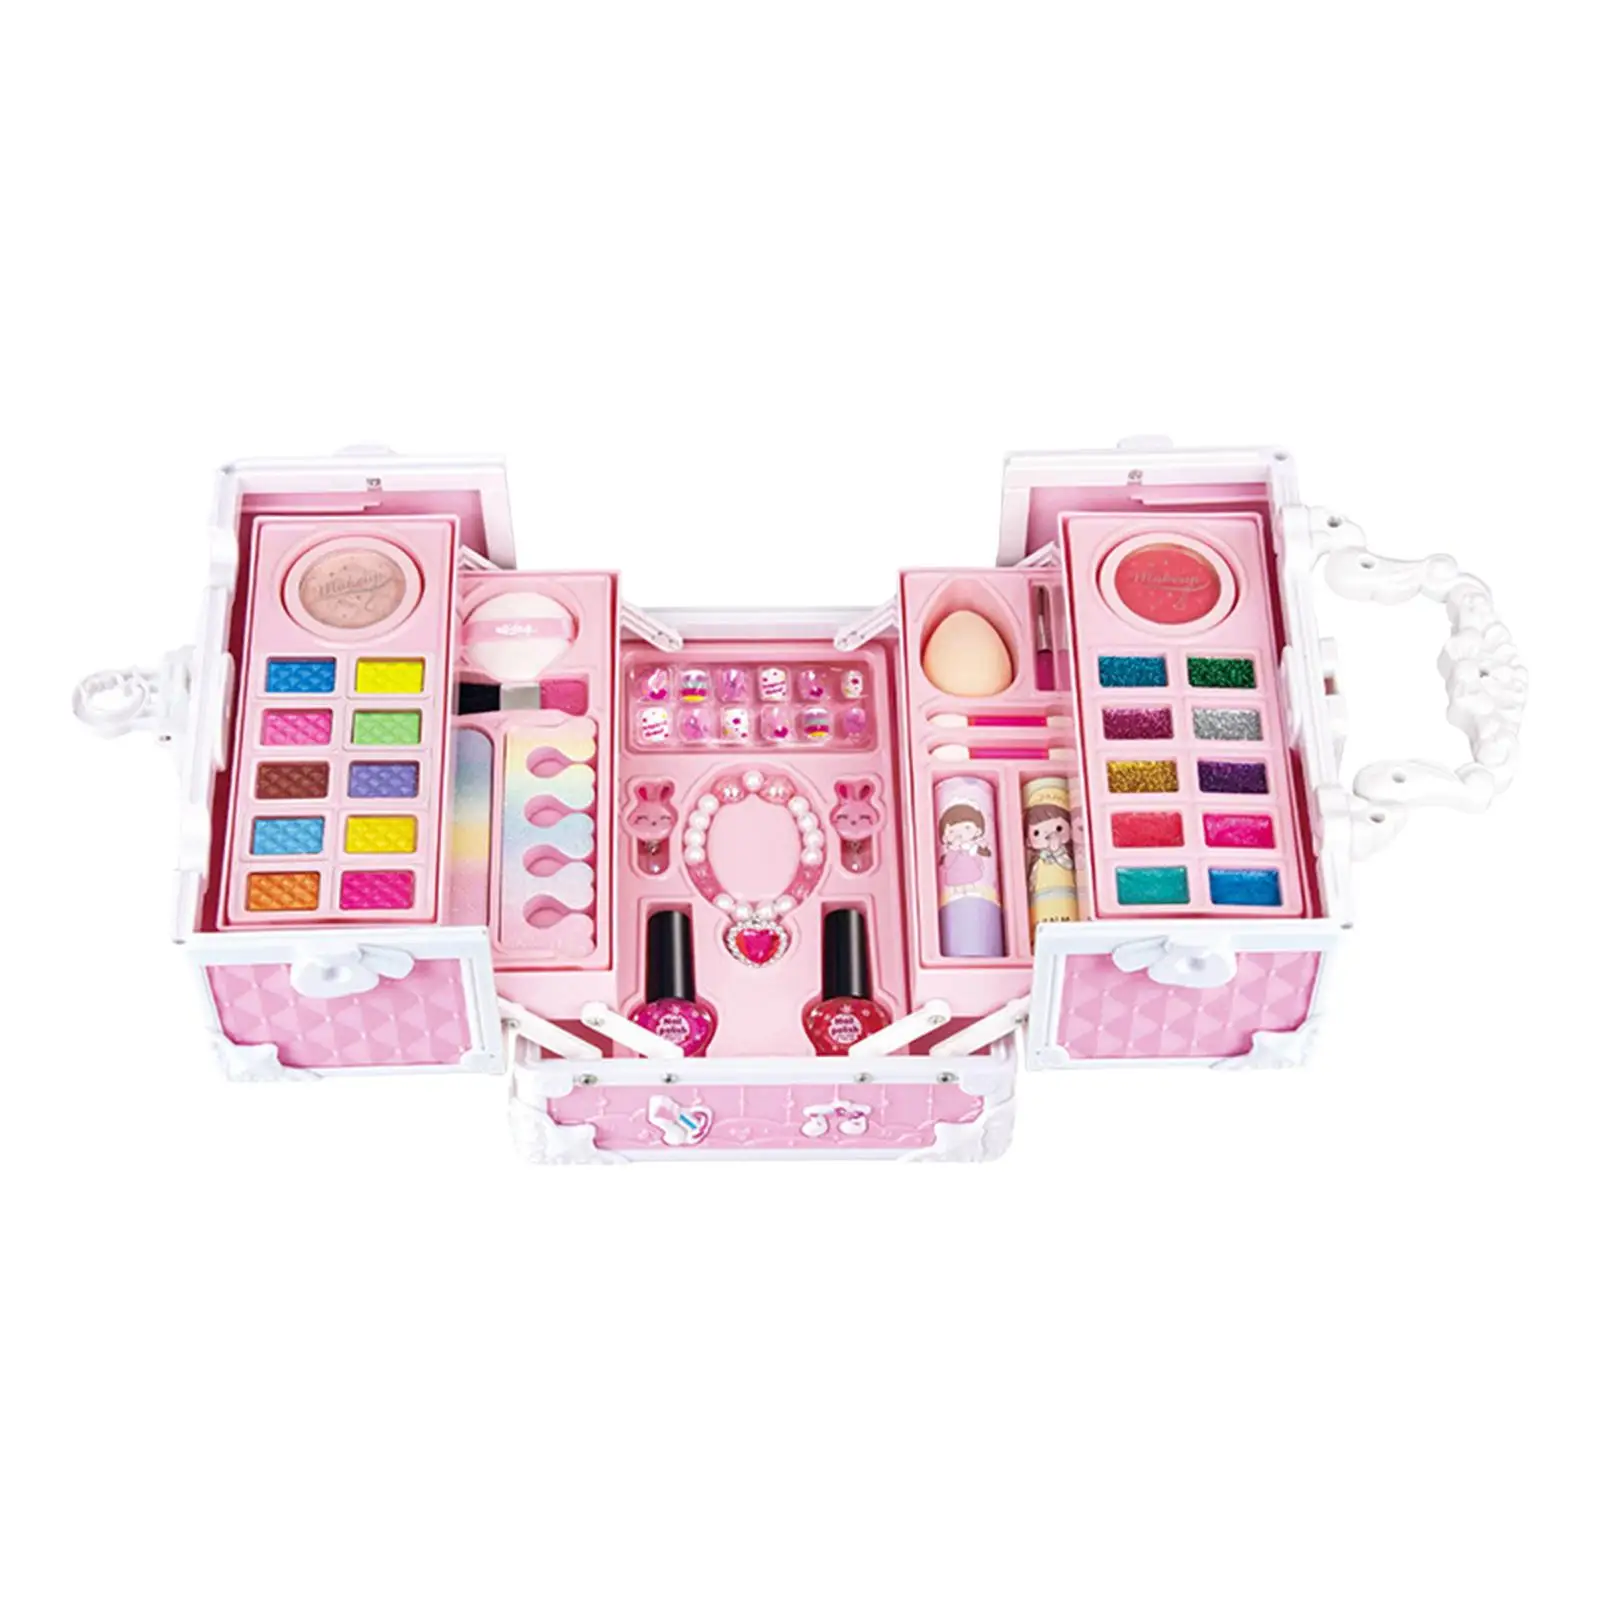 Kids Makeup Kits Makeup Set Toy Vanity Set Girls Toy ,Role Playing for Age 3 4 5+ Toddlers Present Gift